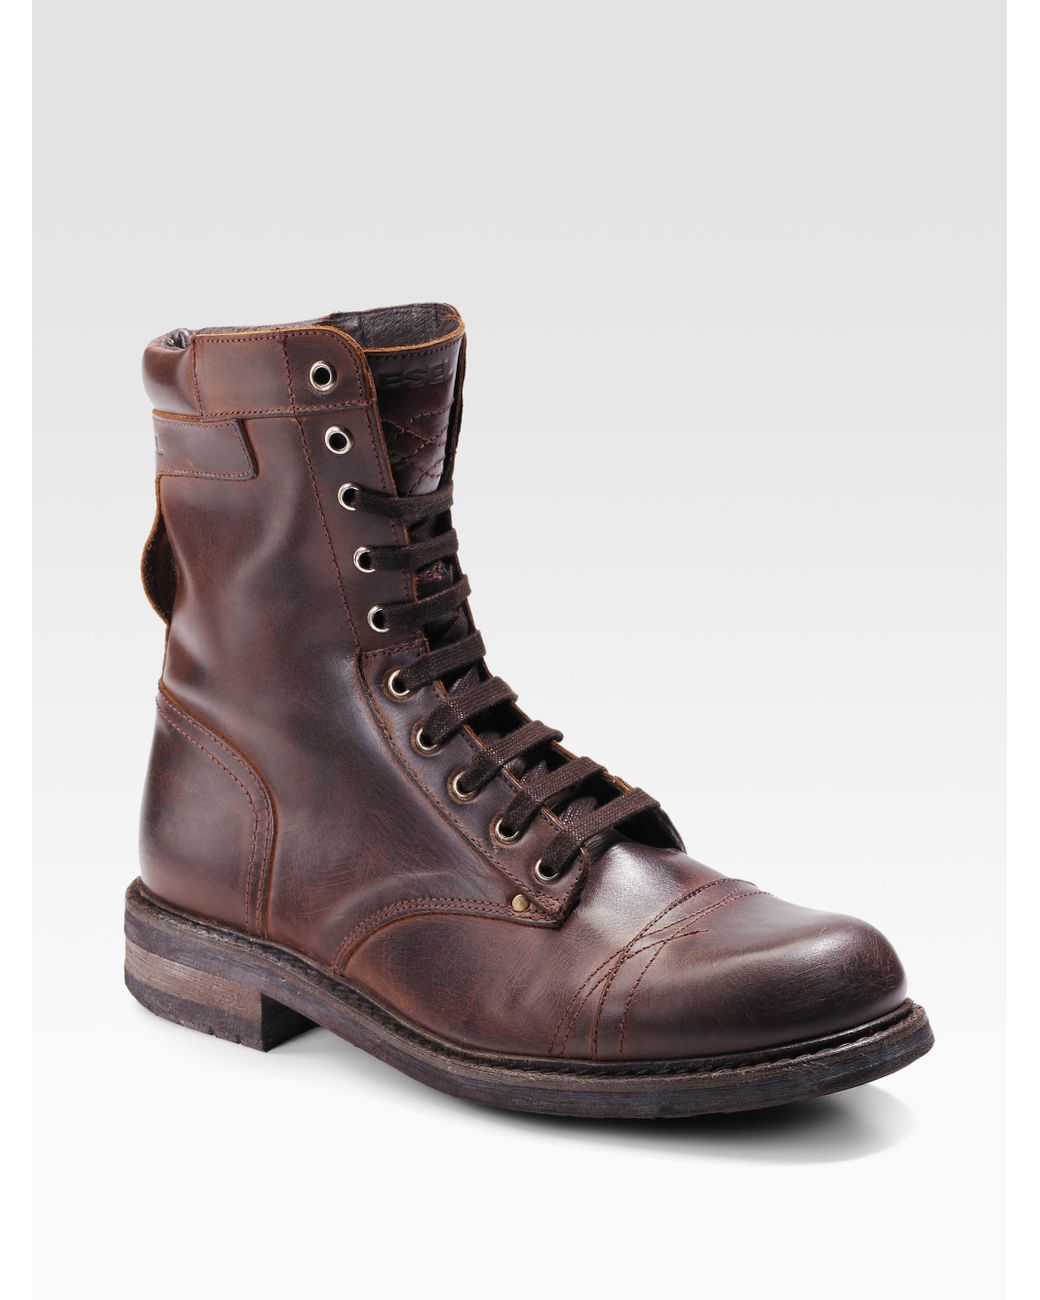 DIESEL Butch & Cassidy Boots in Brown for Men | Lyst